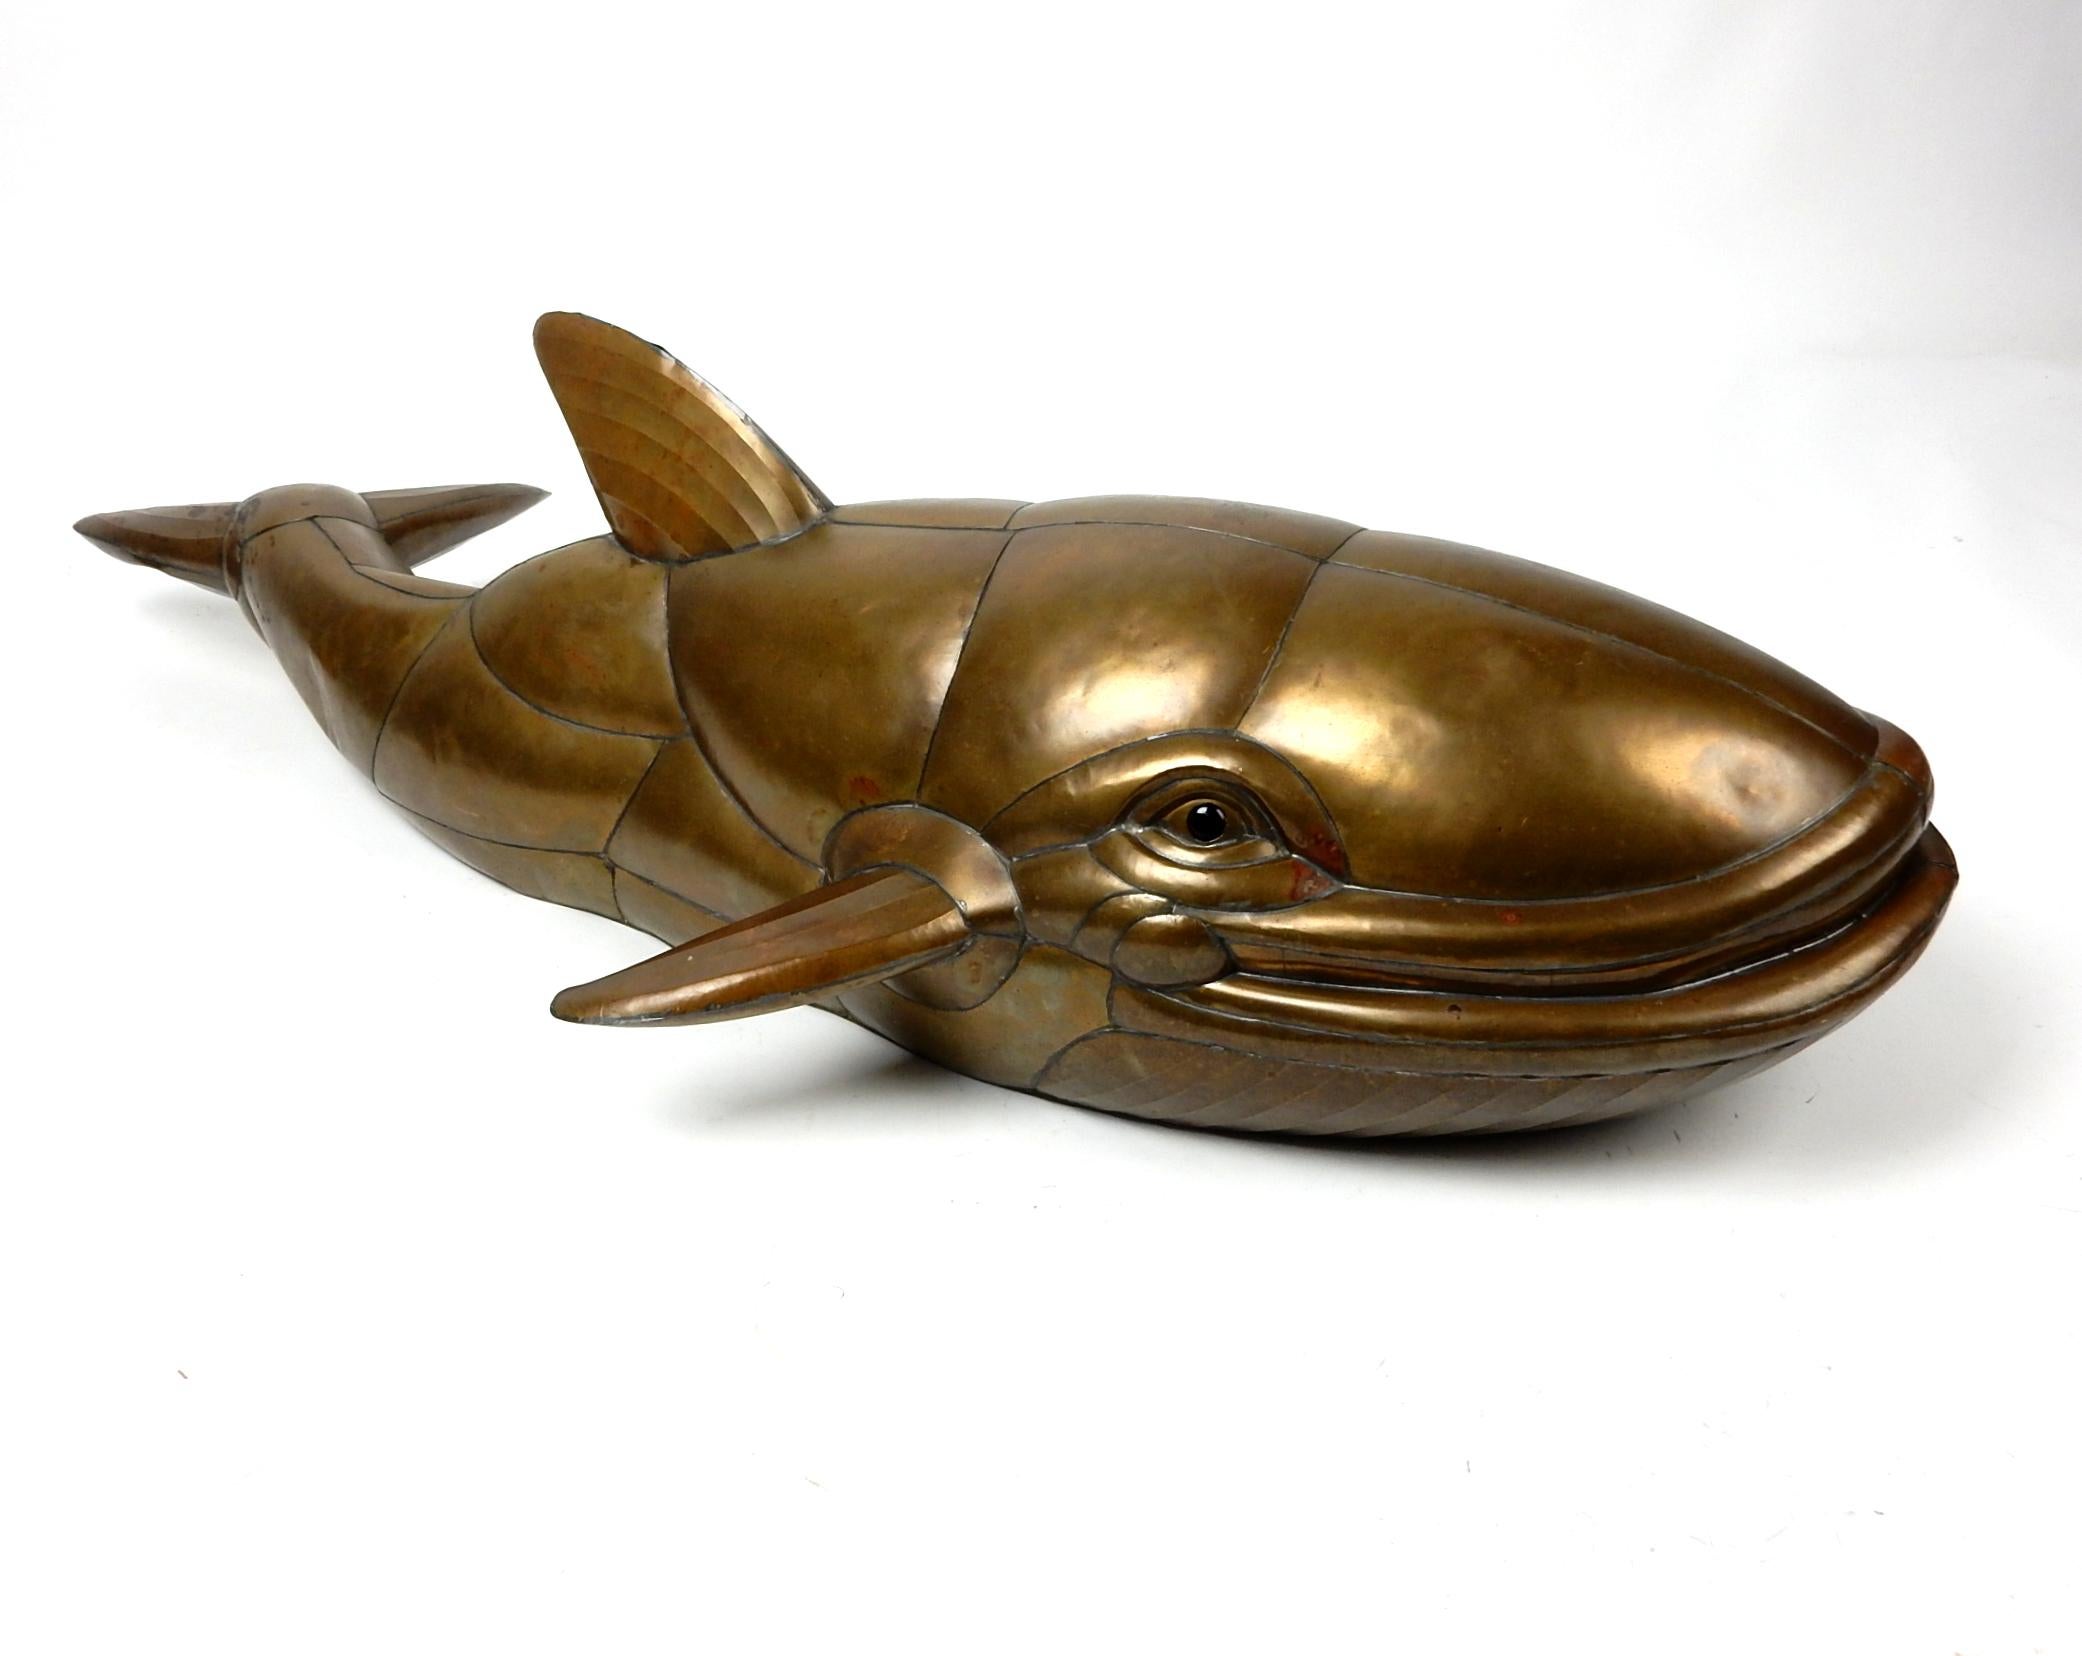 Rare brass and copper sculpture of a whale by Sergio Bustamante, circa 1970's
Un-signed. Measures 38